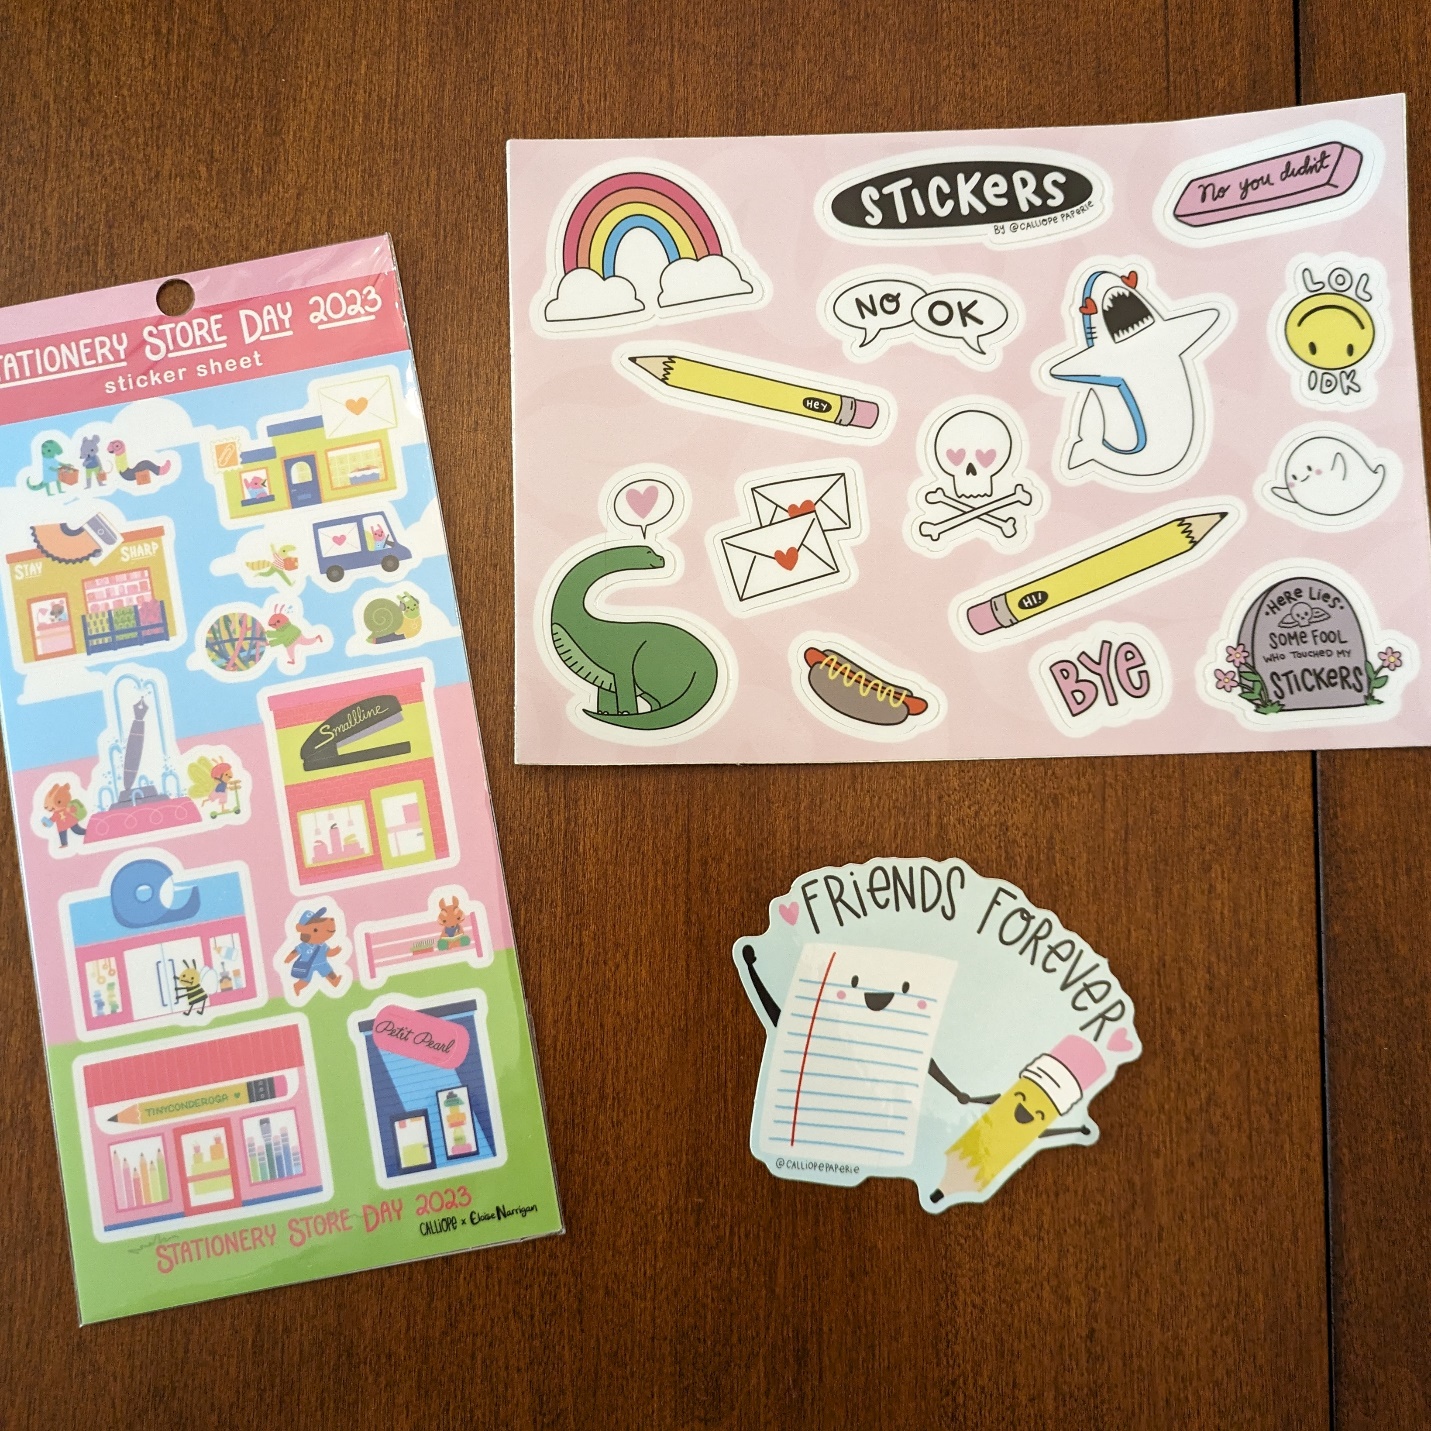 More stickers. The sheet on the left has illustrations done specially for Stationery Store Day by Eloise Narrigan. 